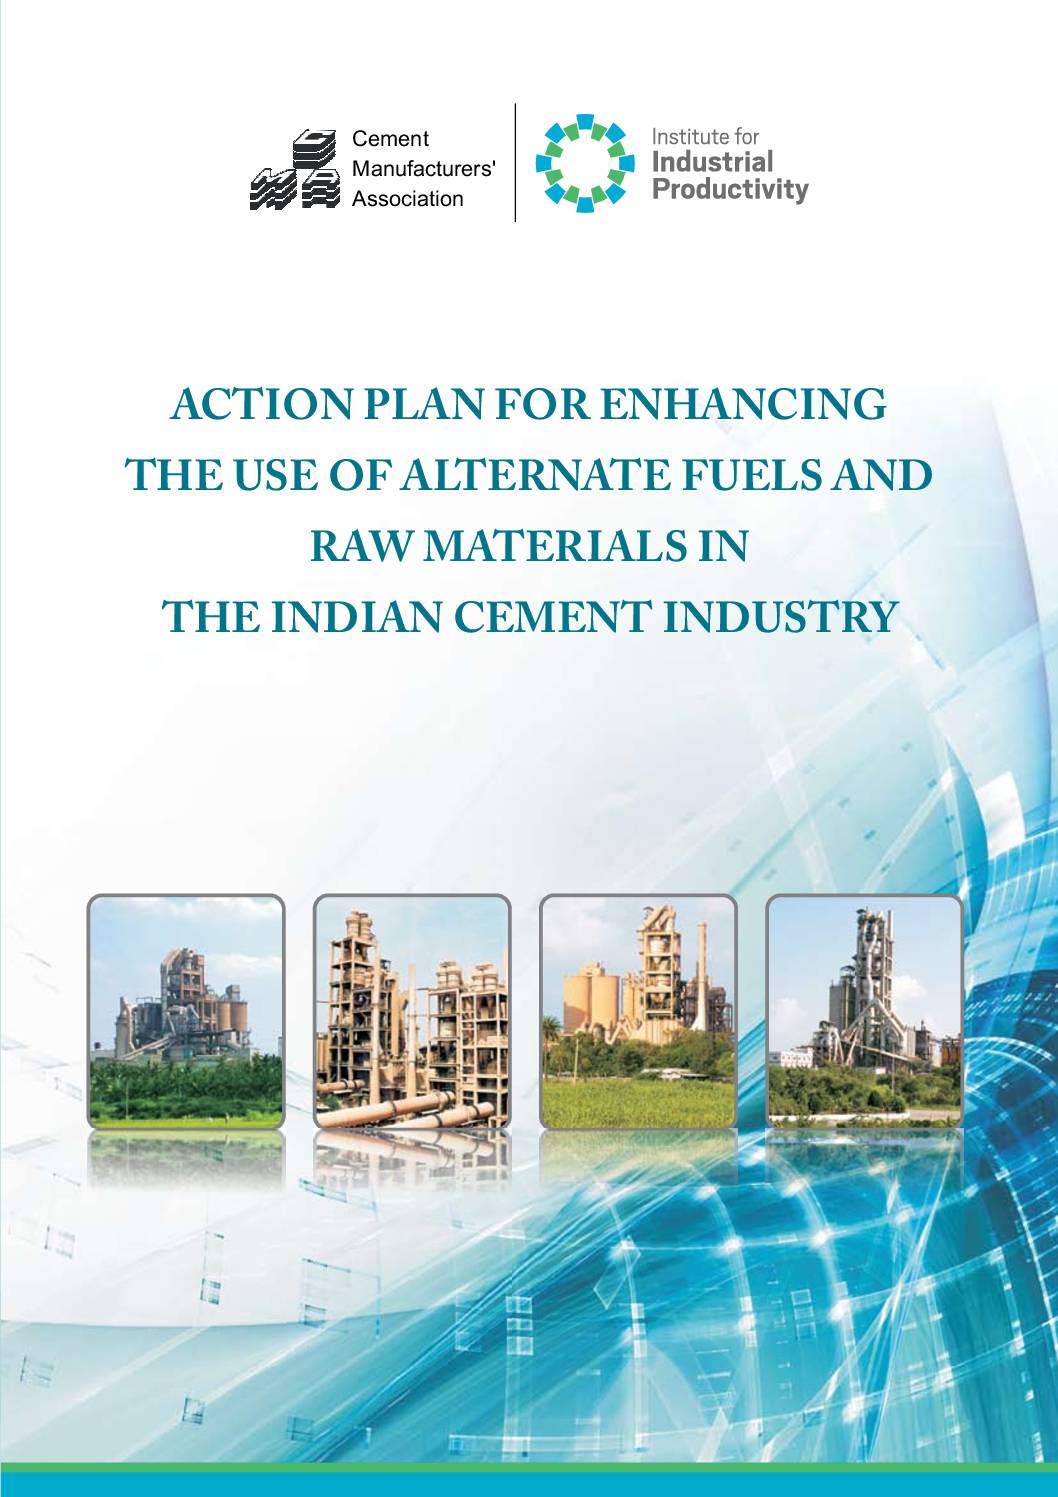 Action plan for enhancing the use of alternate fuels and raw materials in the Indian cement industry